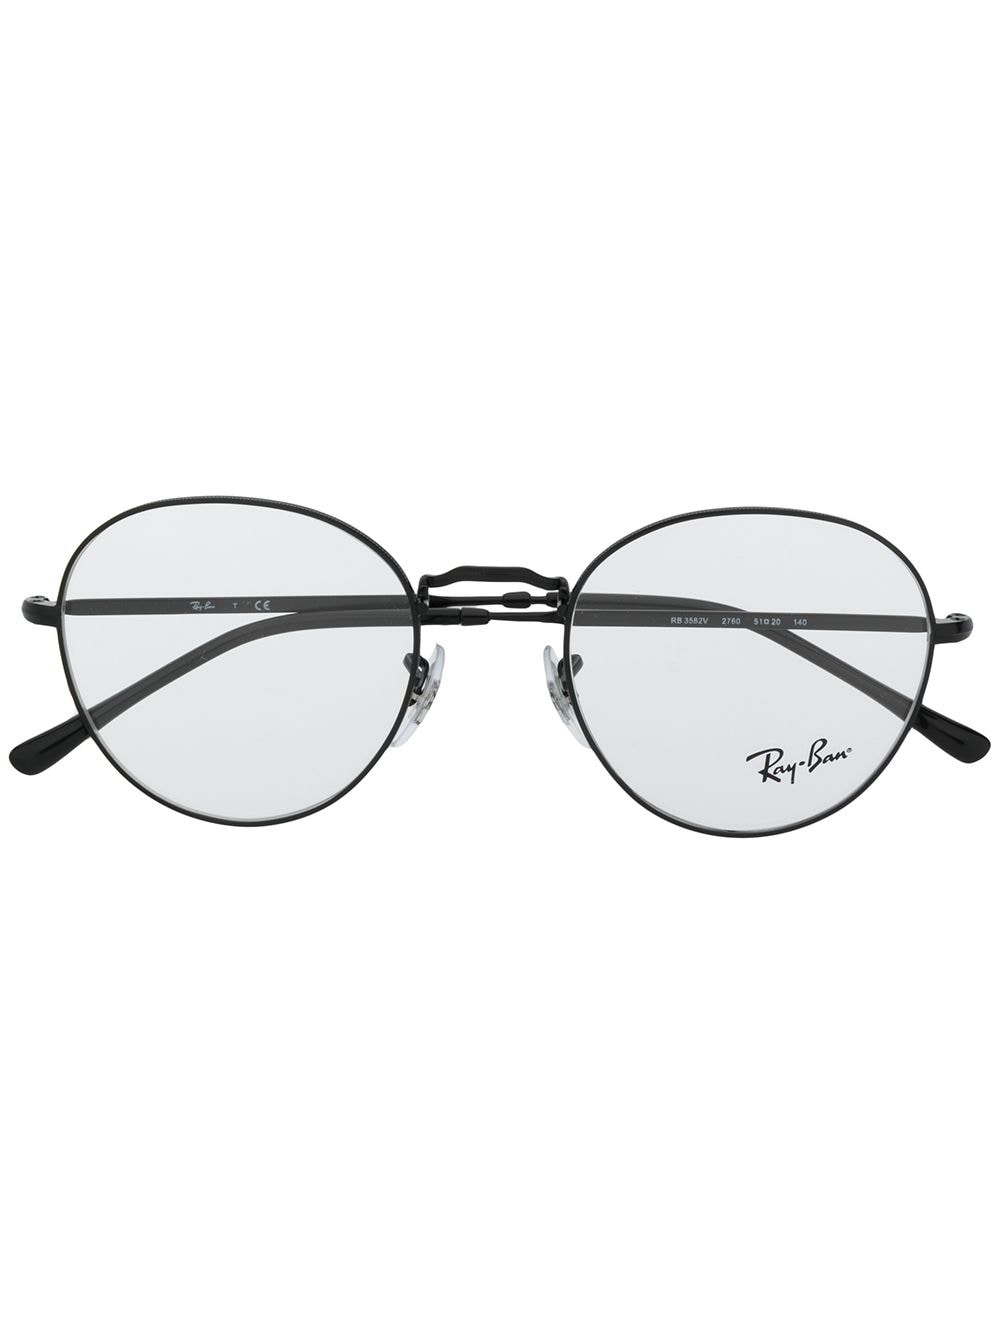 Image 1 of Ray-Ban round shaped glasses